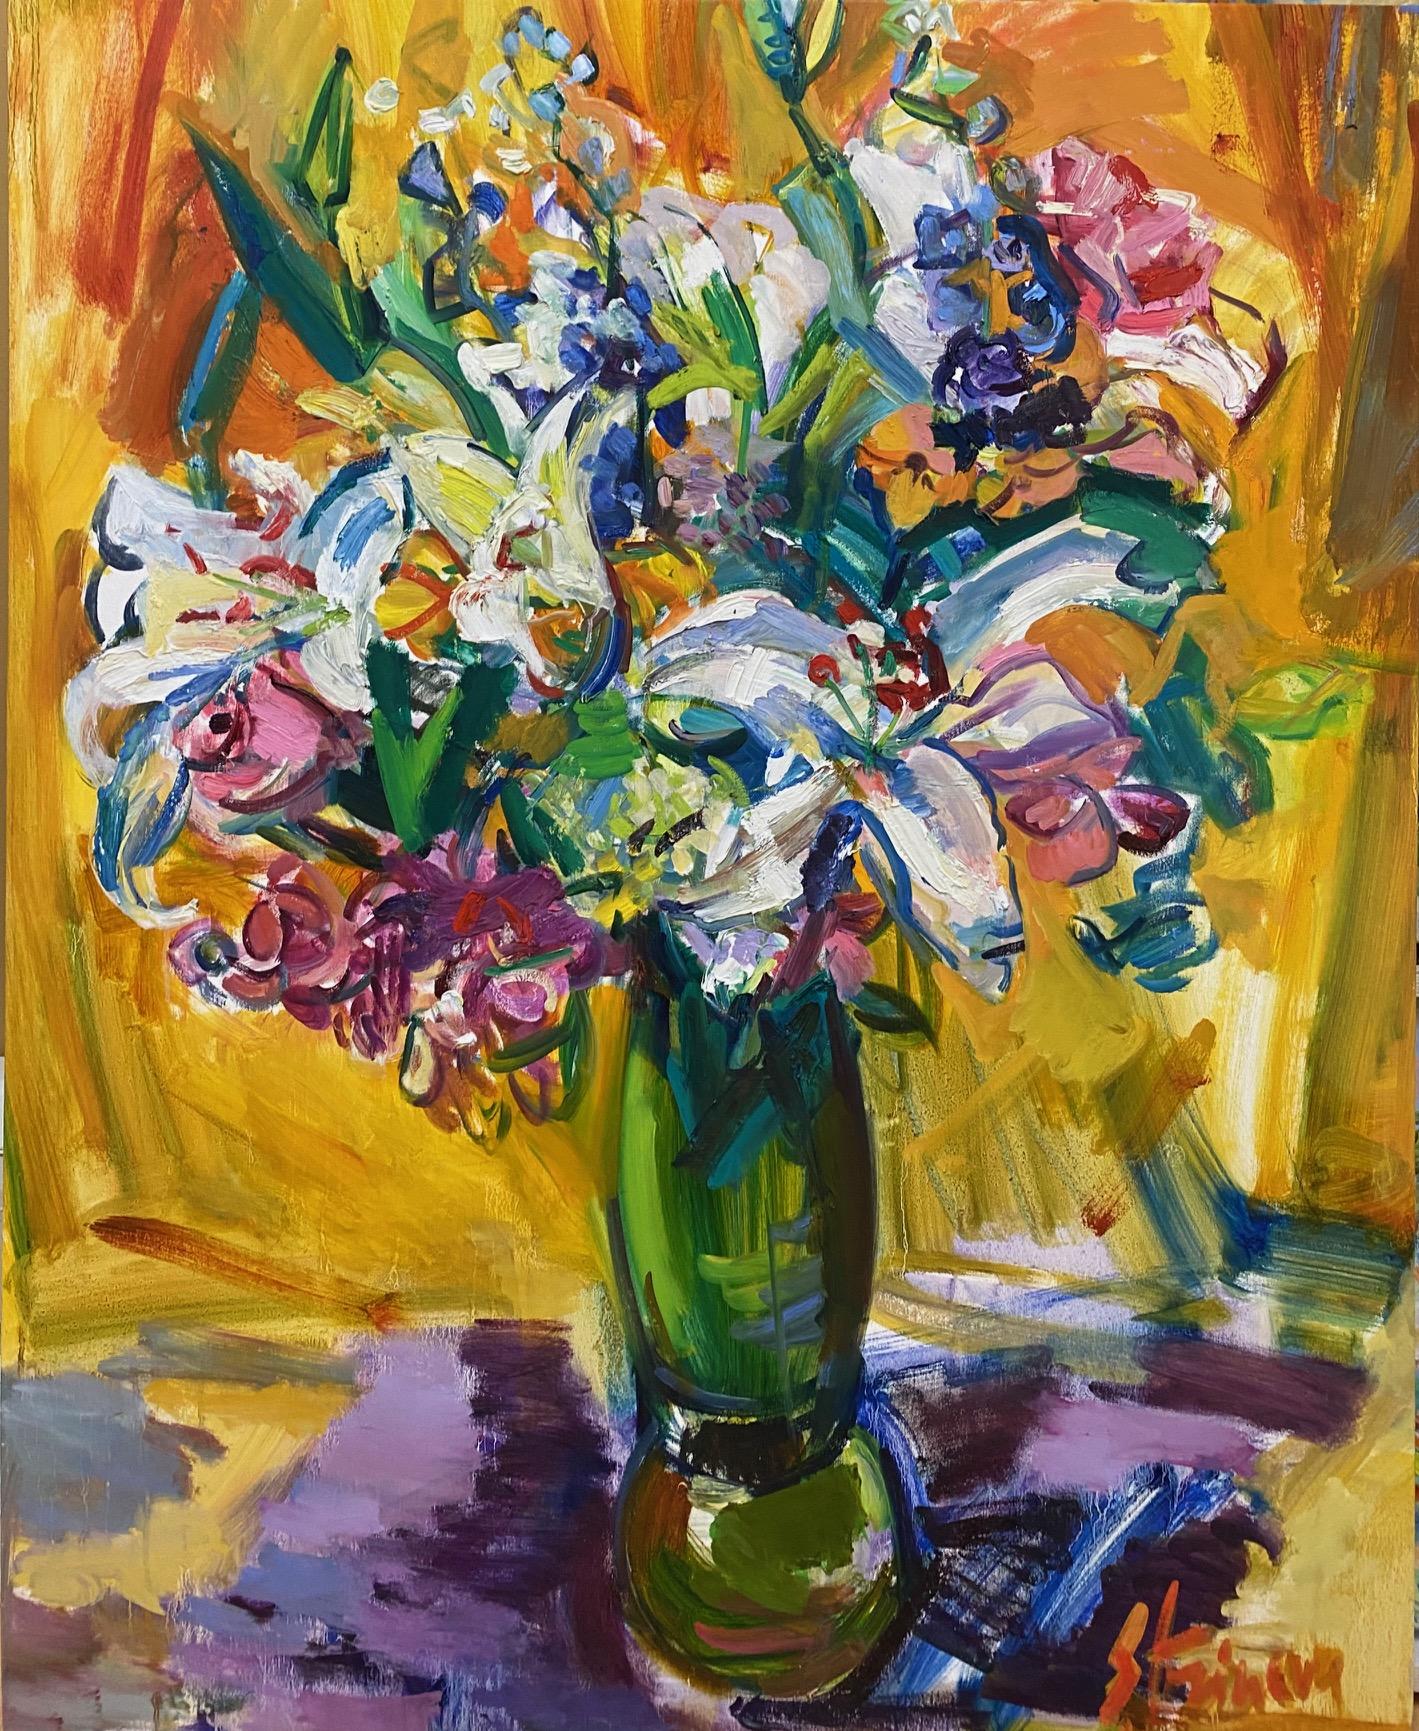 Sonia Grineva Abstract Painting - Flowers in a Vase, original 42 x 33 abstract expressionist floral still life